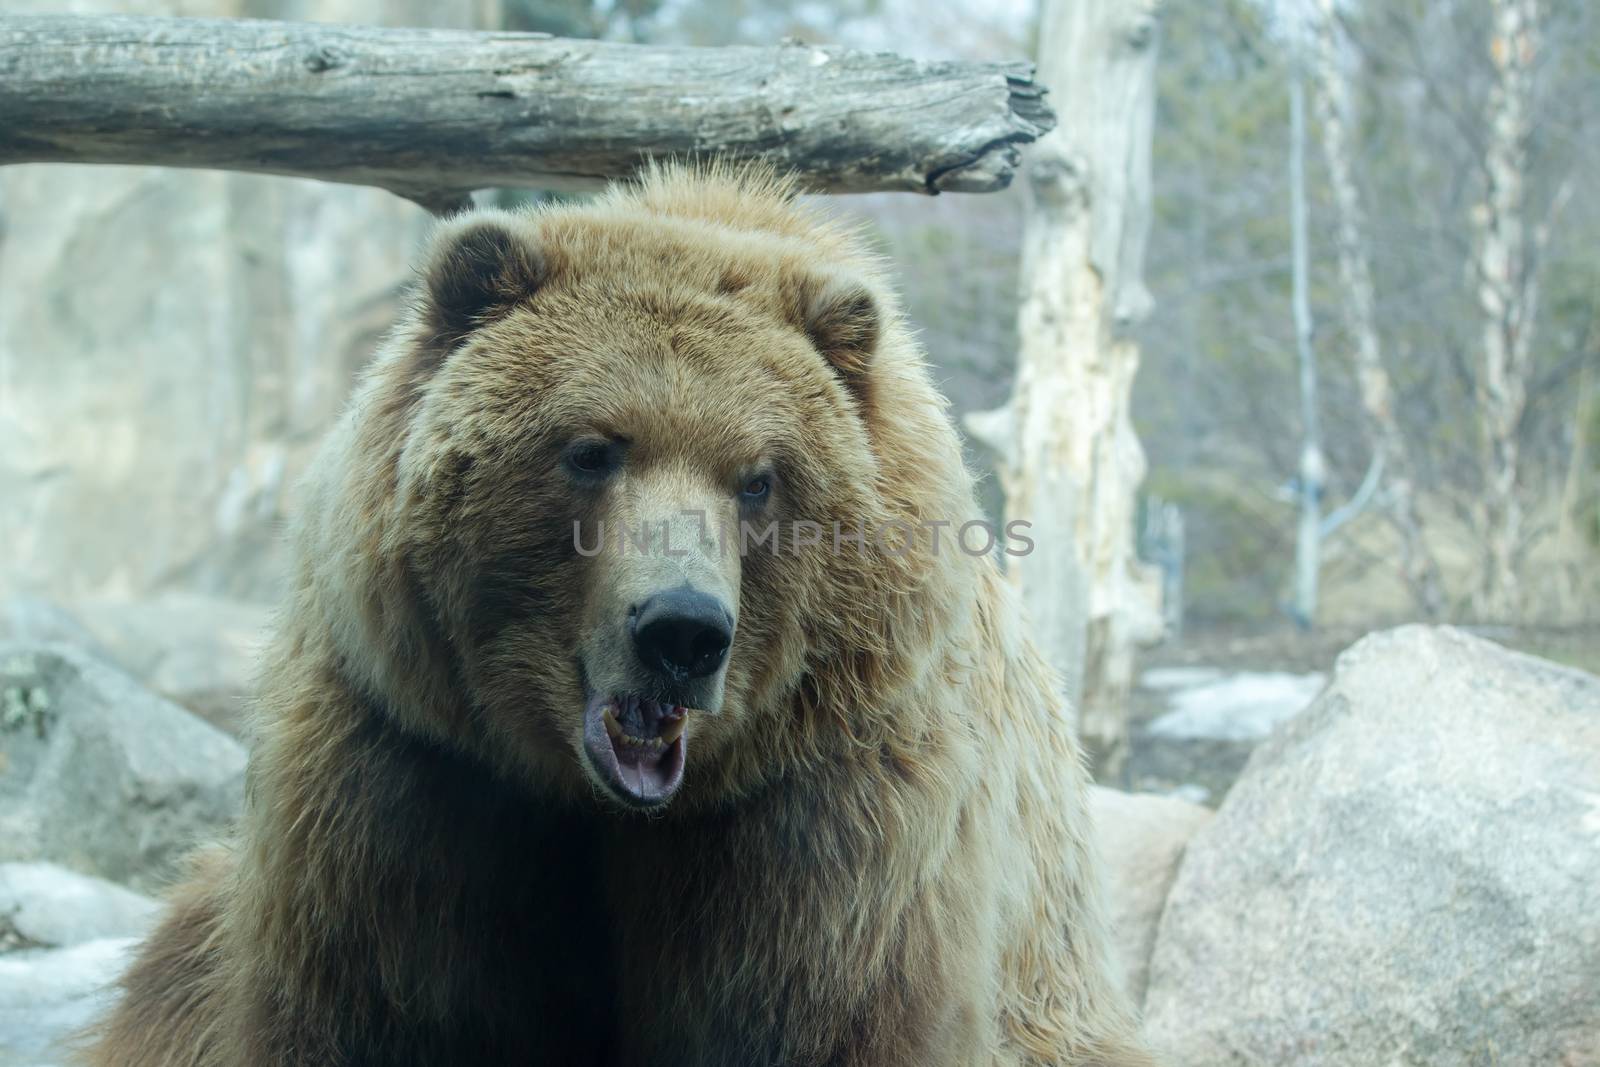 Brown Bear at the zoo by Coffee999